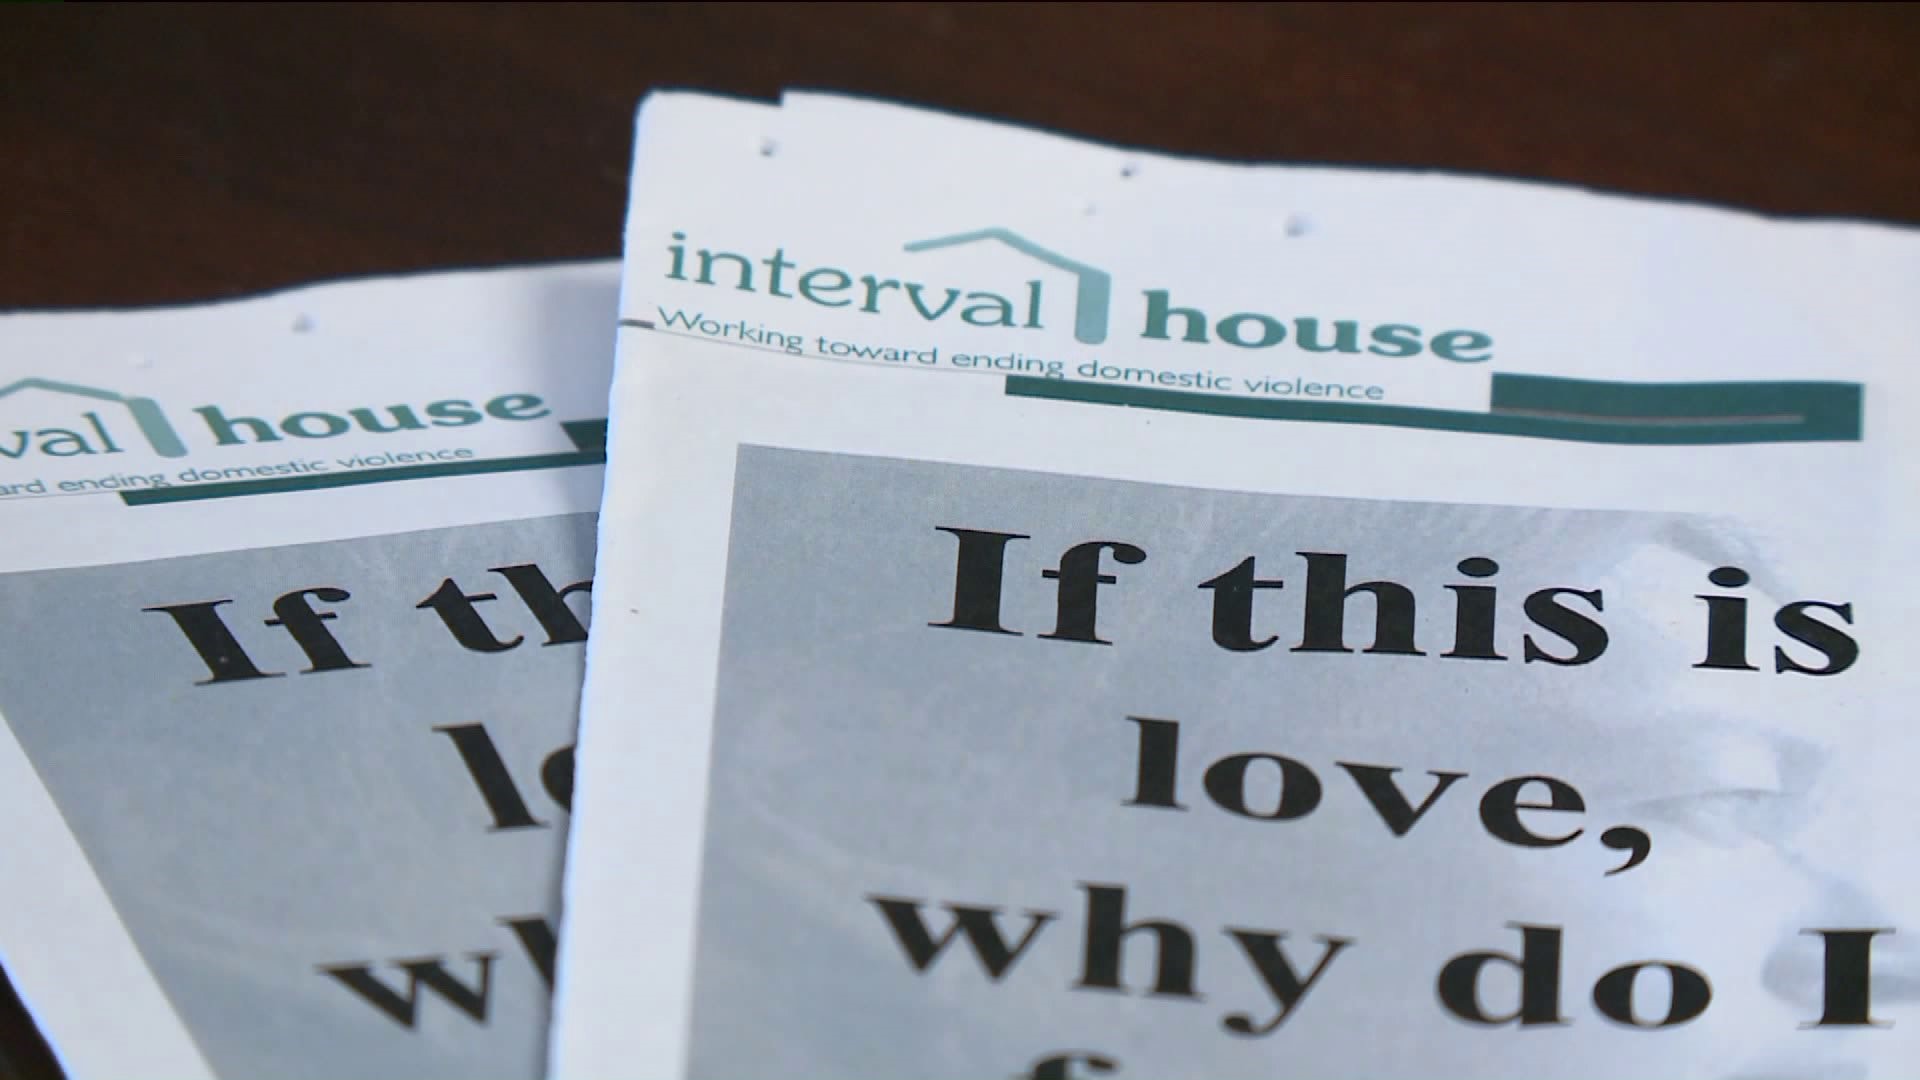 In wake of New Britain Shooting, Interval House CEO speaks out